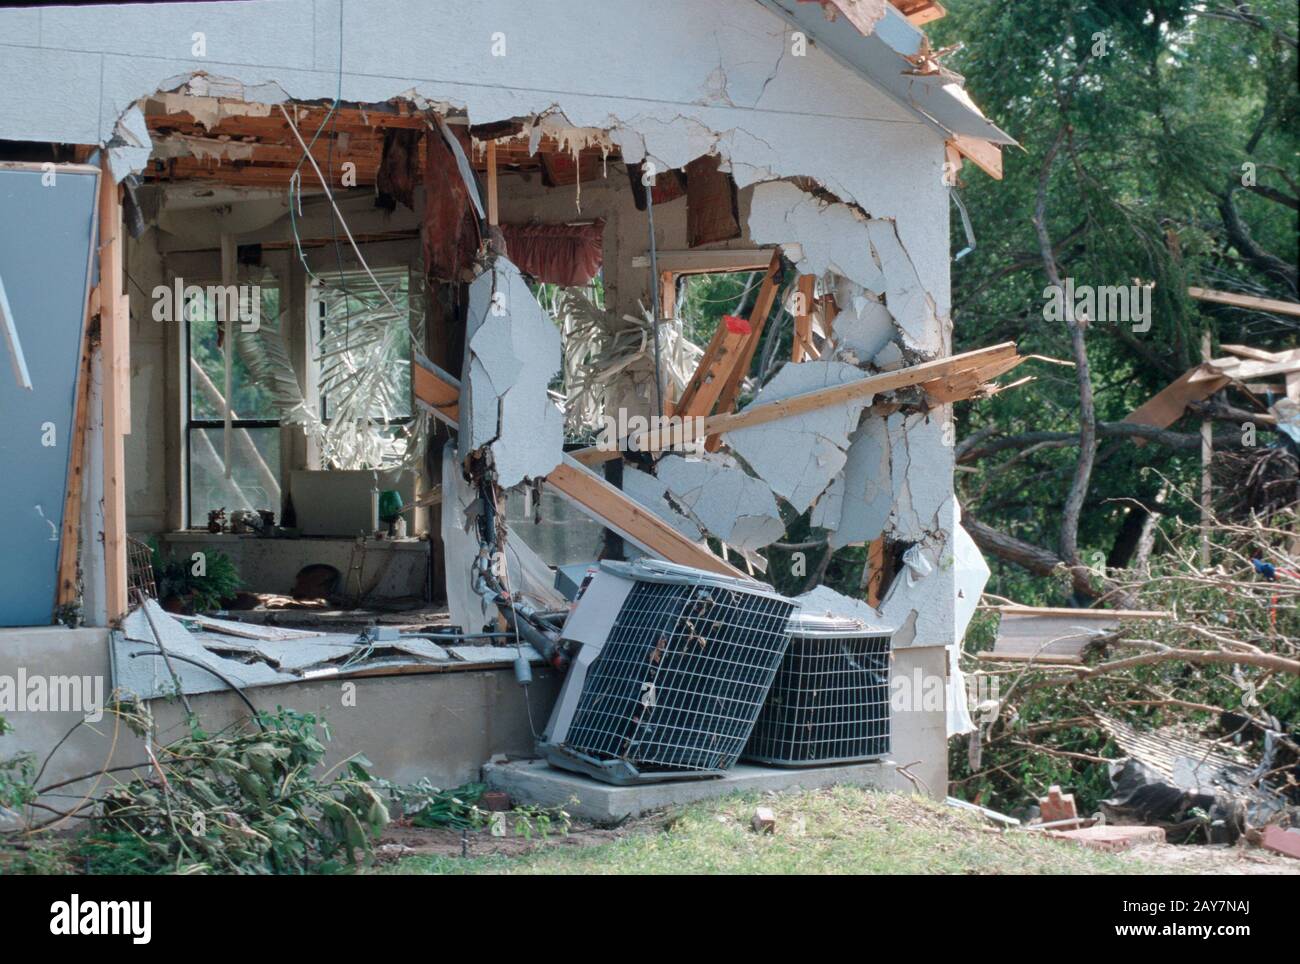 New Braunfels, Texas: Severely damaged home in upscale neighborhood near the banks of the Guadalupe Rive after a flash flood devastated the area in Comal County, central Texas. October 1998 ©Bob Daemmrich Stock Photo